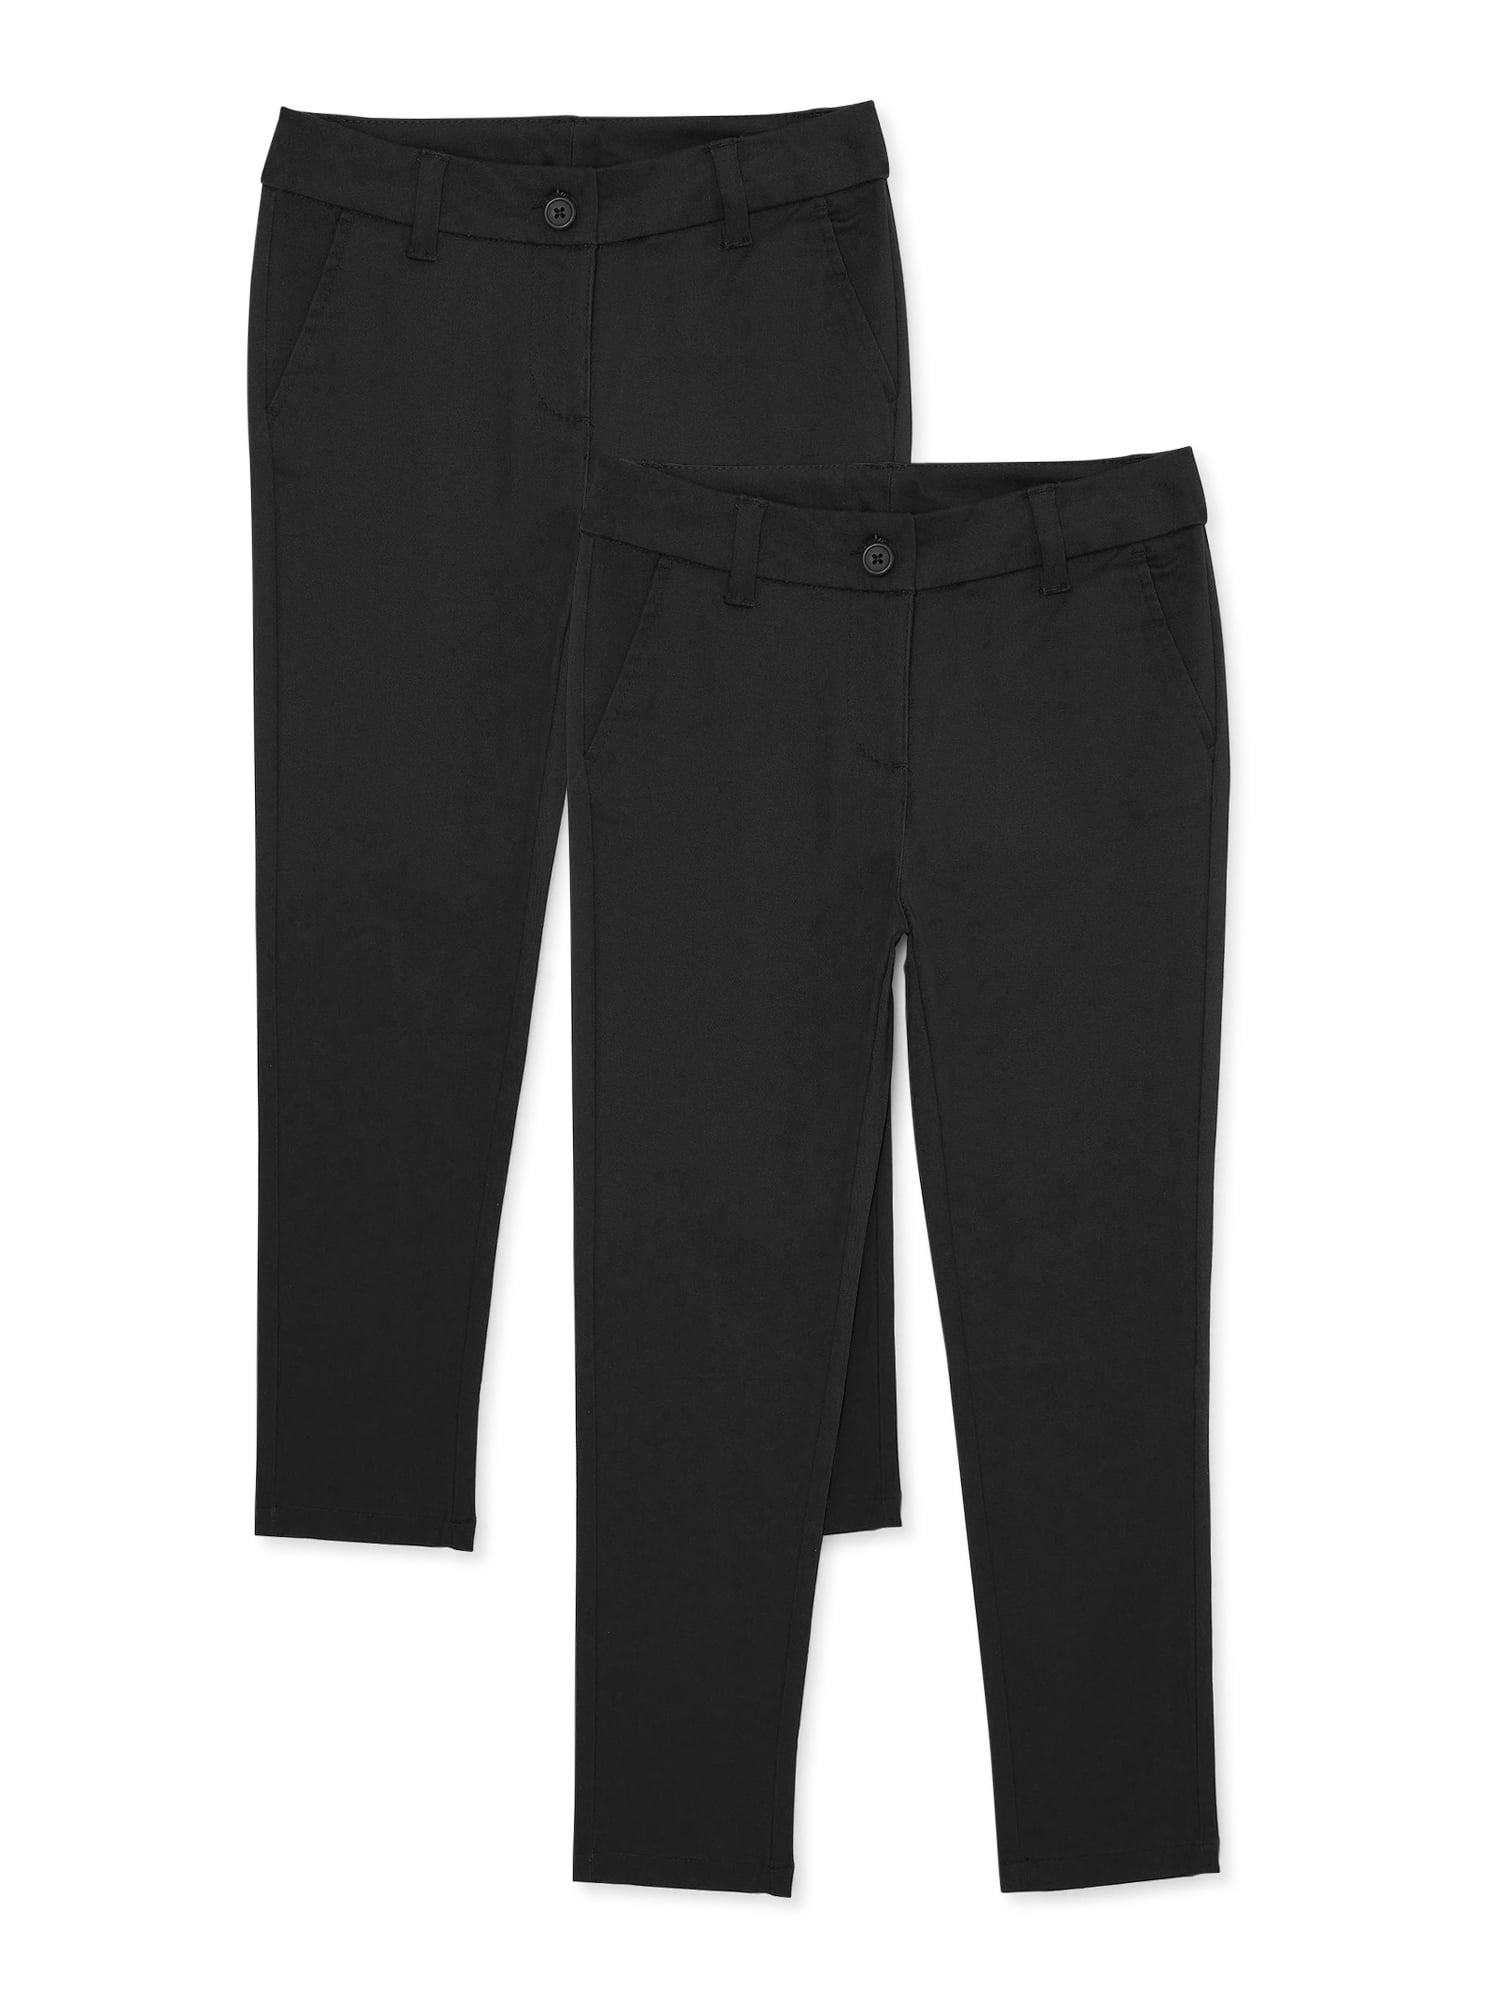 Jesmond Park Academy Approved Boys Black Slim fit trousers  Michael Sehgal  and Sons Ltd  Buy School Uniform for Boys and Girls